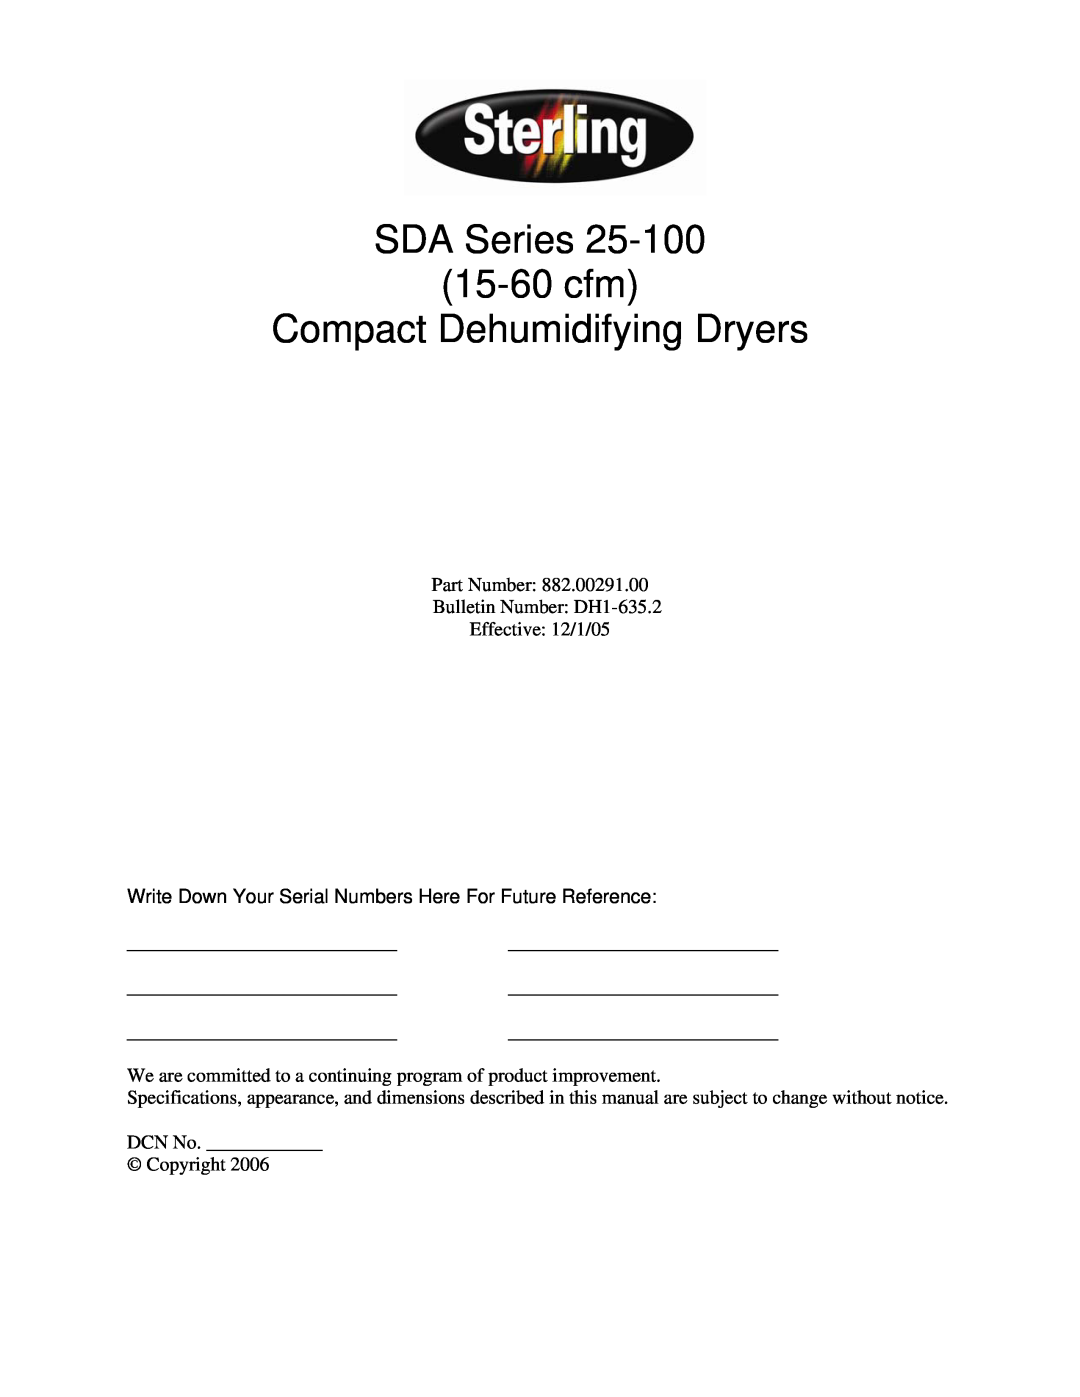 Sterling 882.00291.00 specifications SDA Series 15, 30, & 60 cfm, Compact Dehumidifying Dryers 